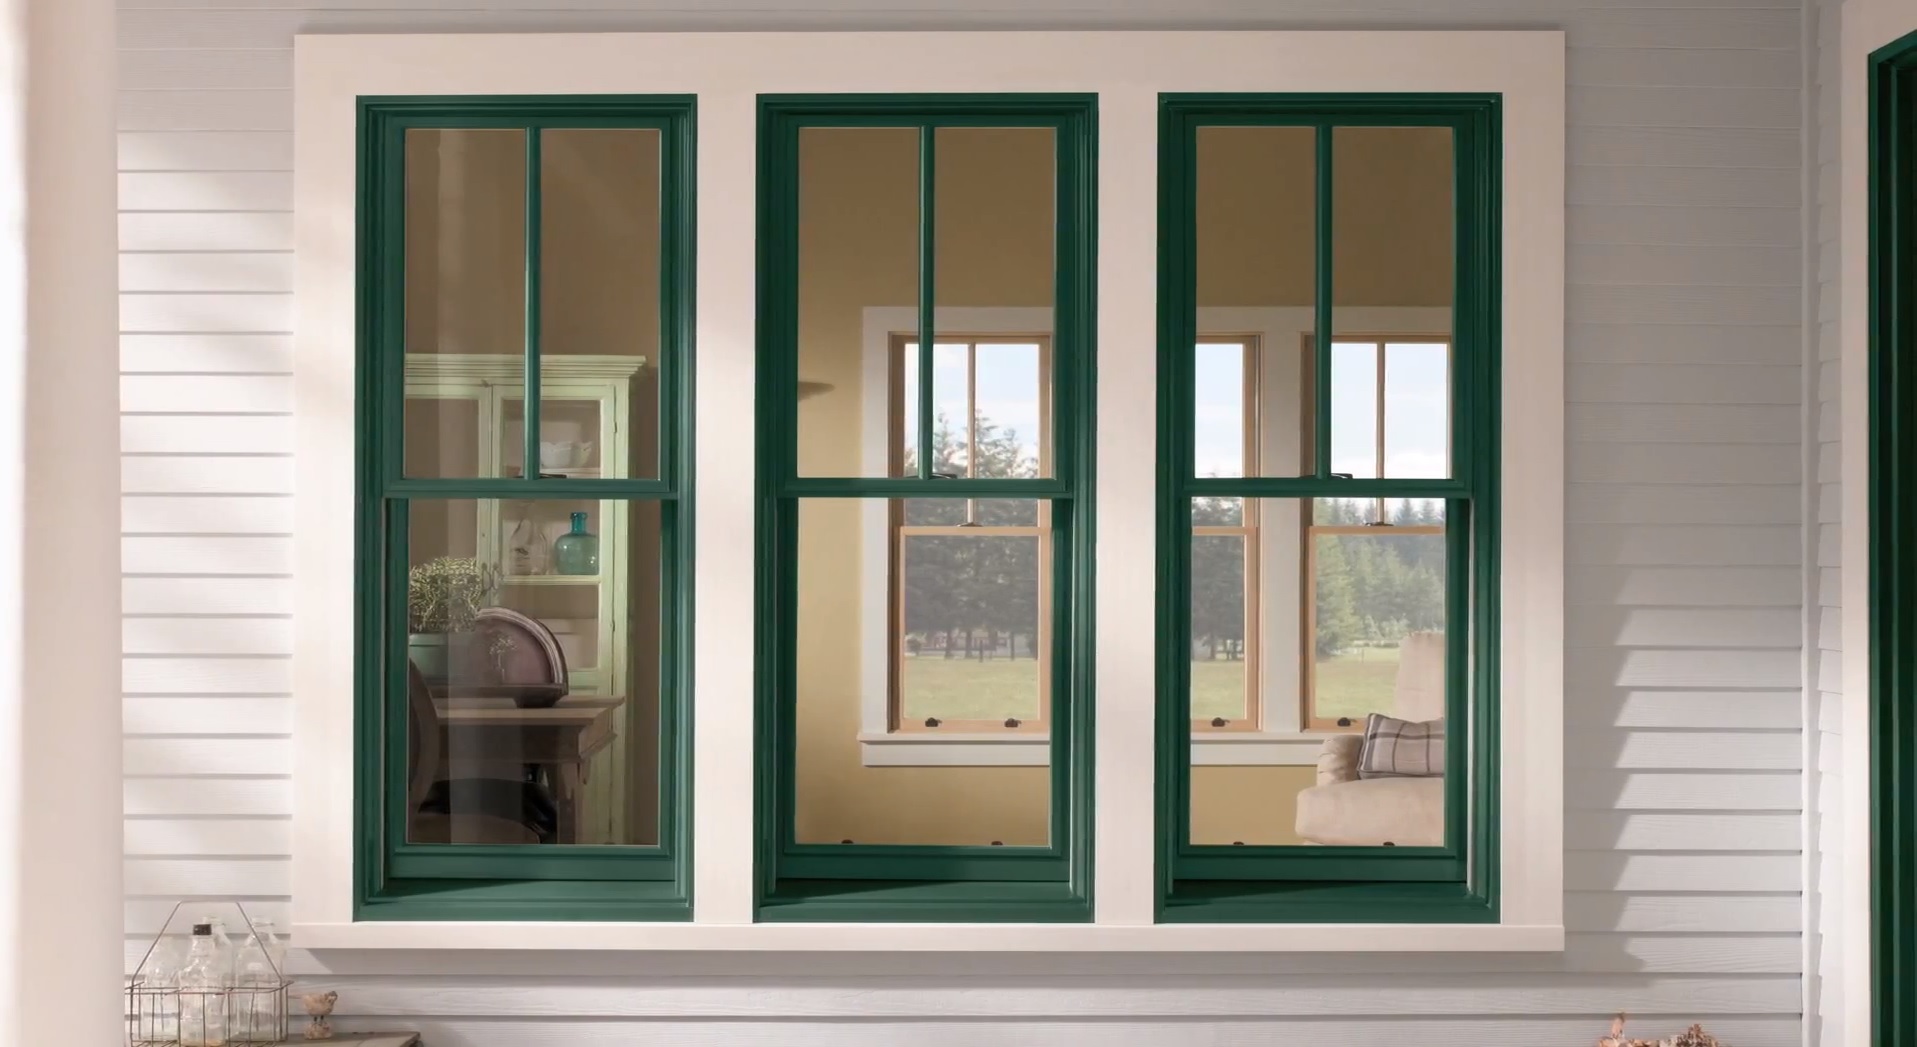 Thinking Of Replacement Windows For Your Home? Choose The Right High ...